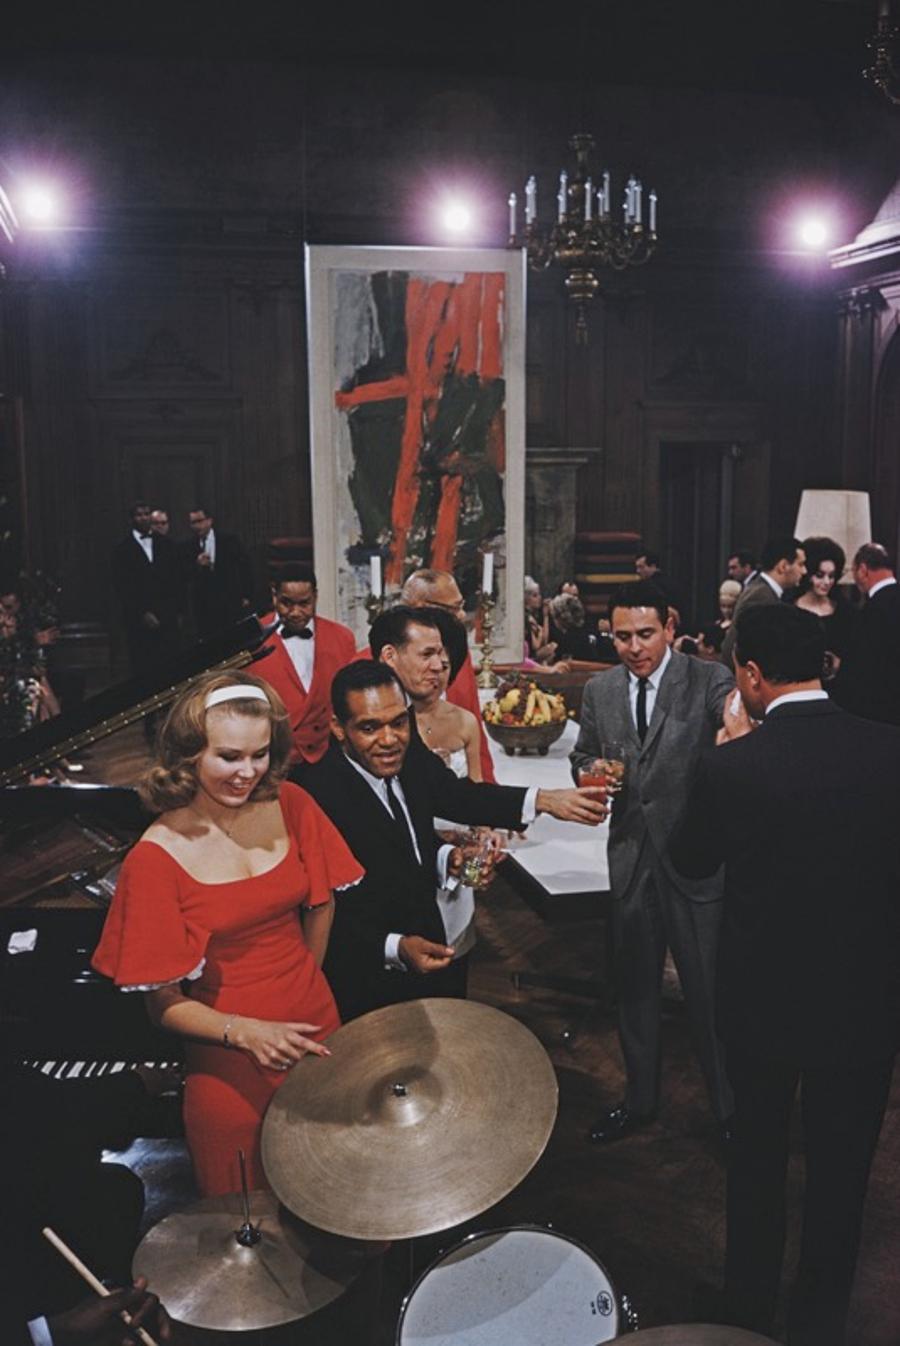 Party At The Playboy Mansion 
1961
by Slim Aarons

Slim Aarons Limited Estate Edition

Guests of American publisher Hugh Hefner enjoying themselves at a party being held at the Playboy Mansion, Chicago, 1961

unframed
c type print
printed 2023
24 x